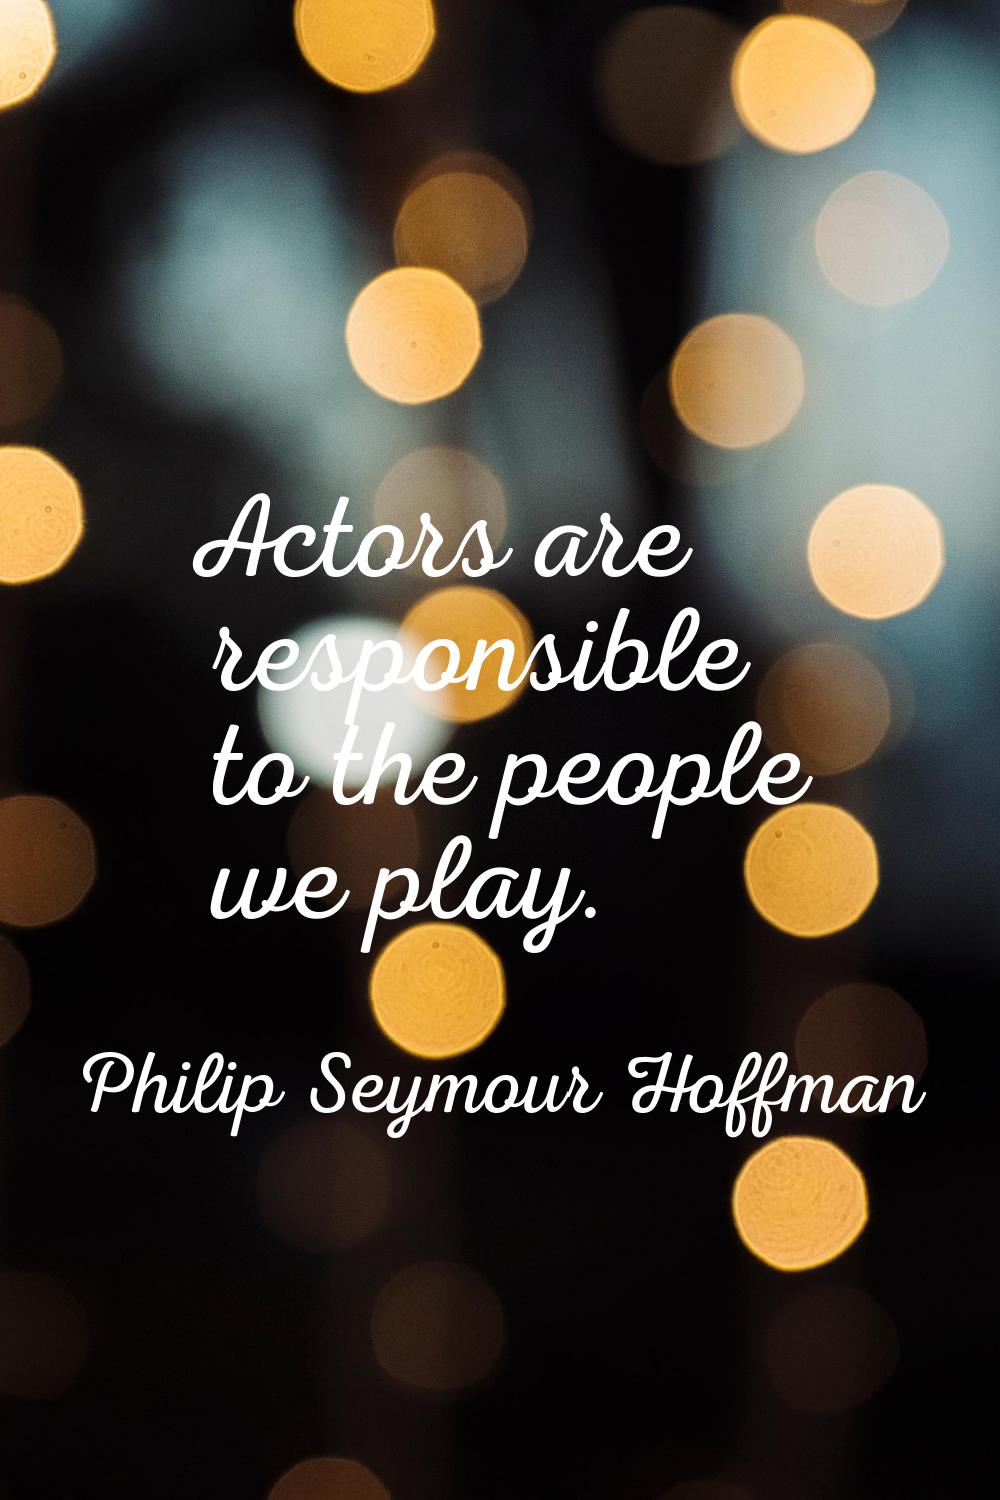 Actors are responsible to the people we play.